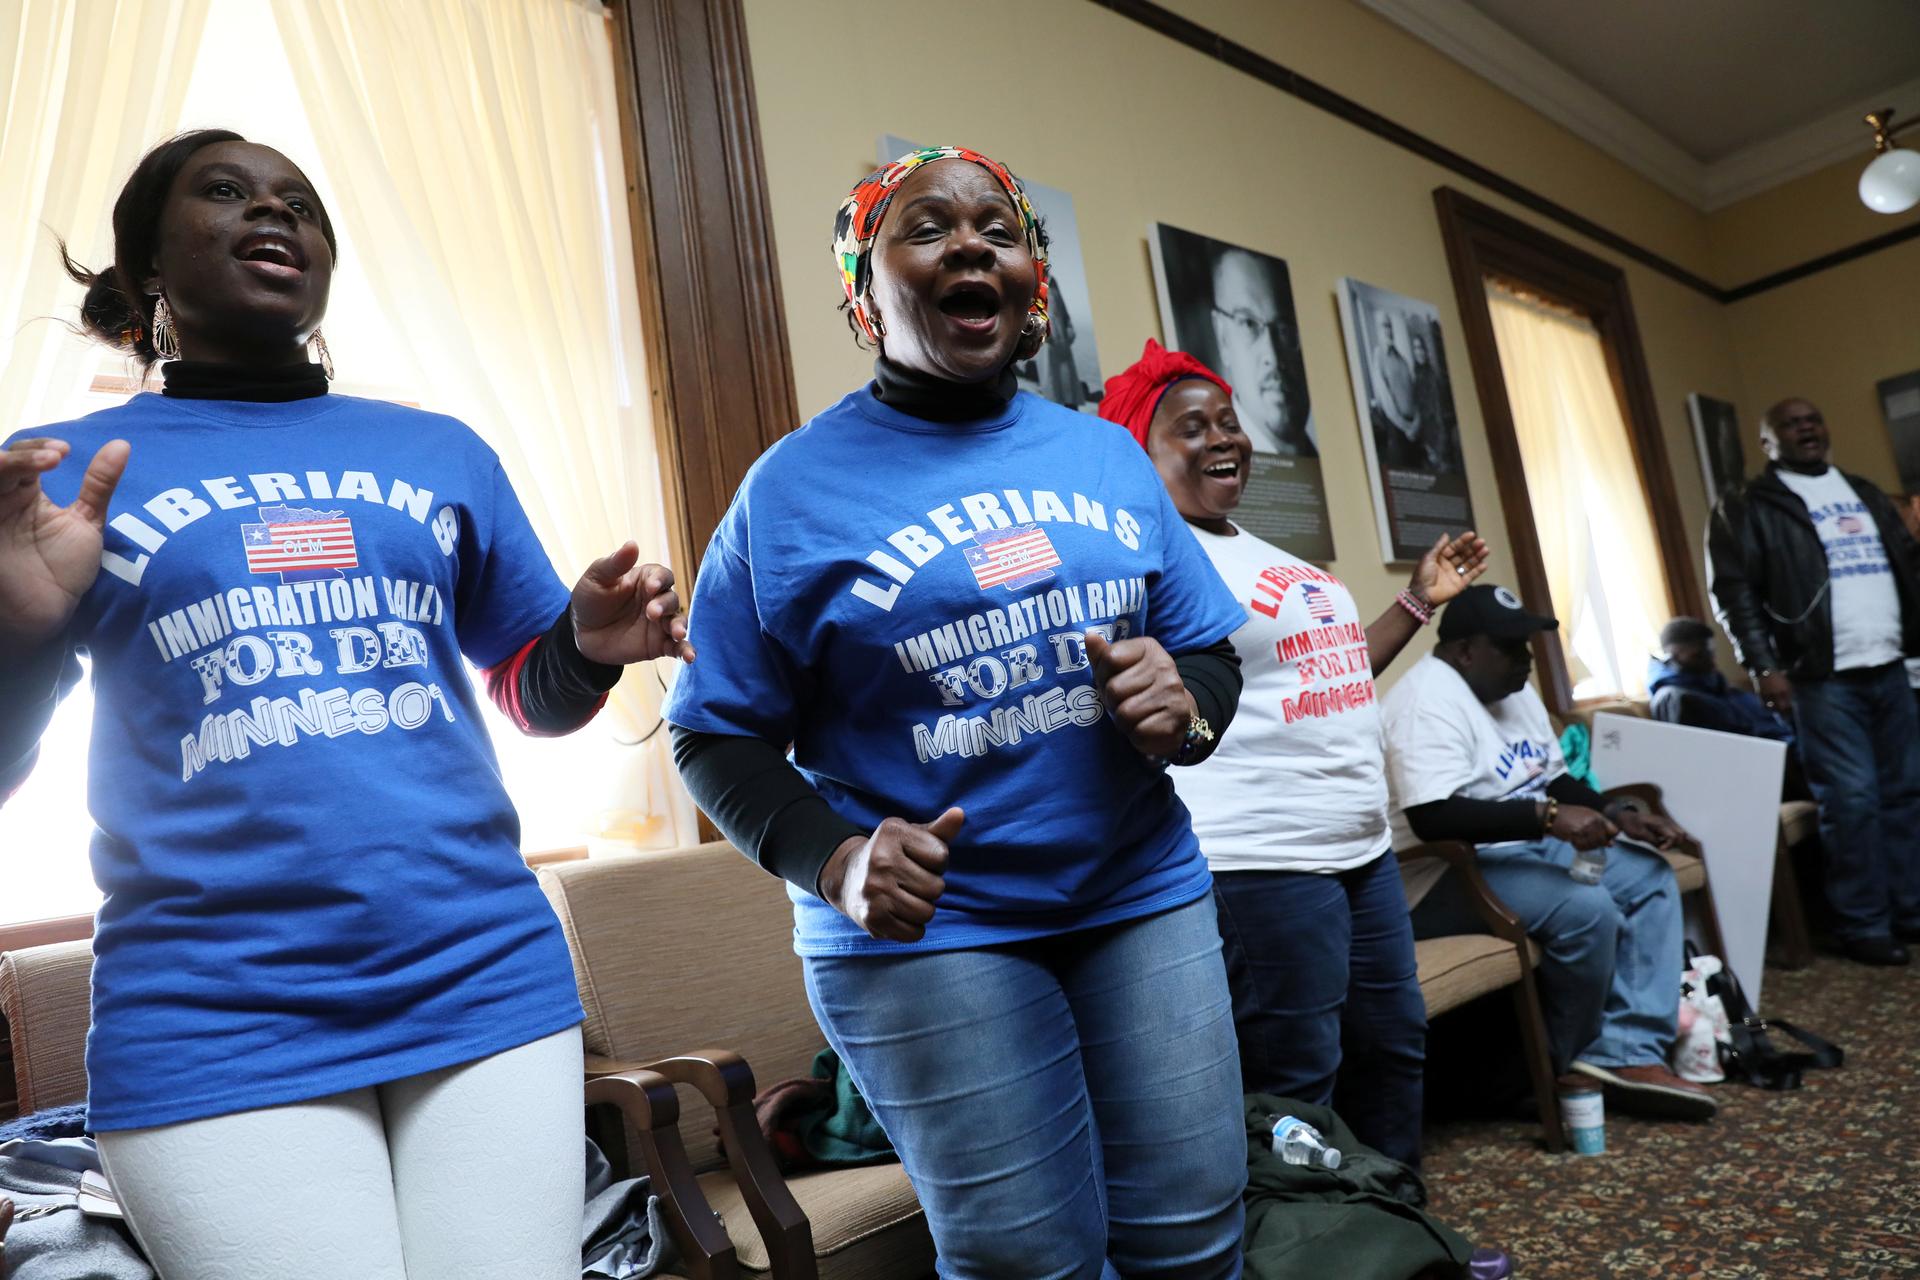 Women in blue and white shirts dance and sing.